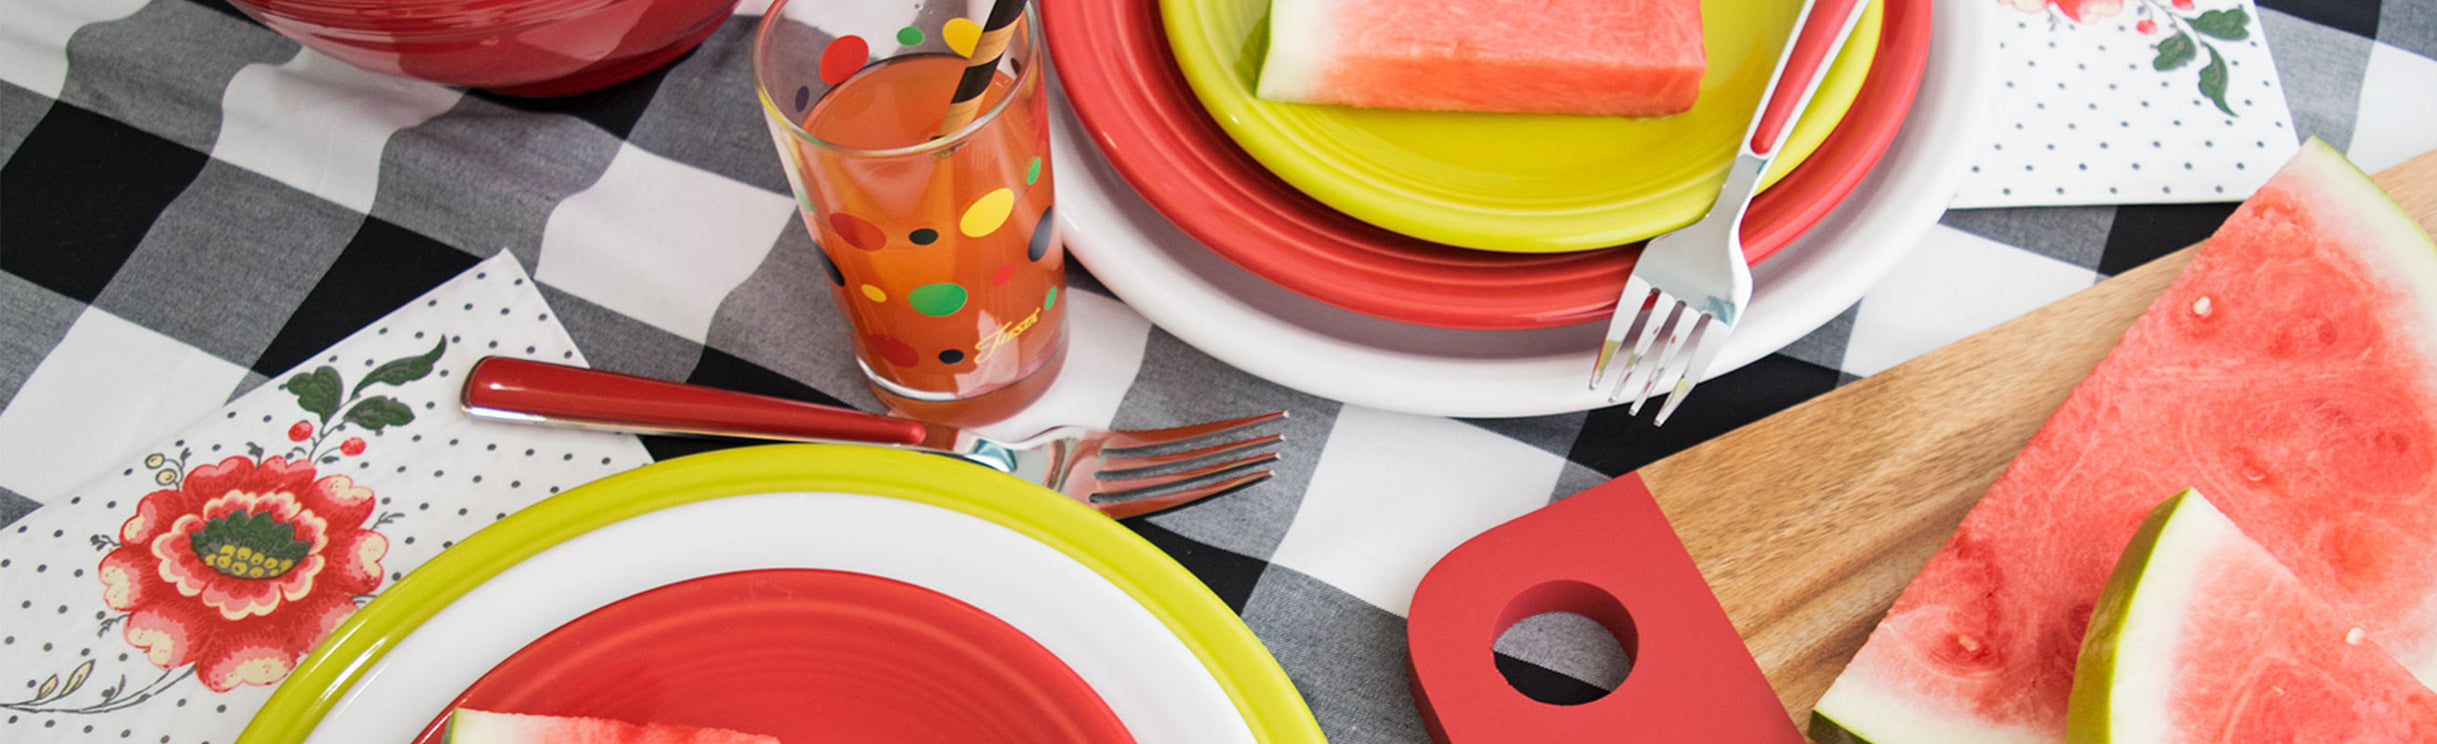 Checker place setting with multi color plates